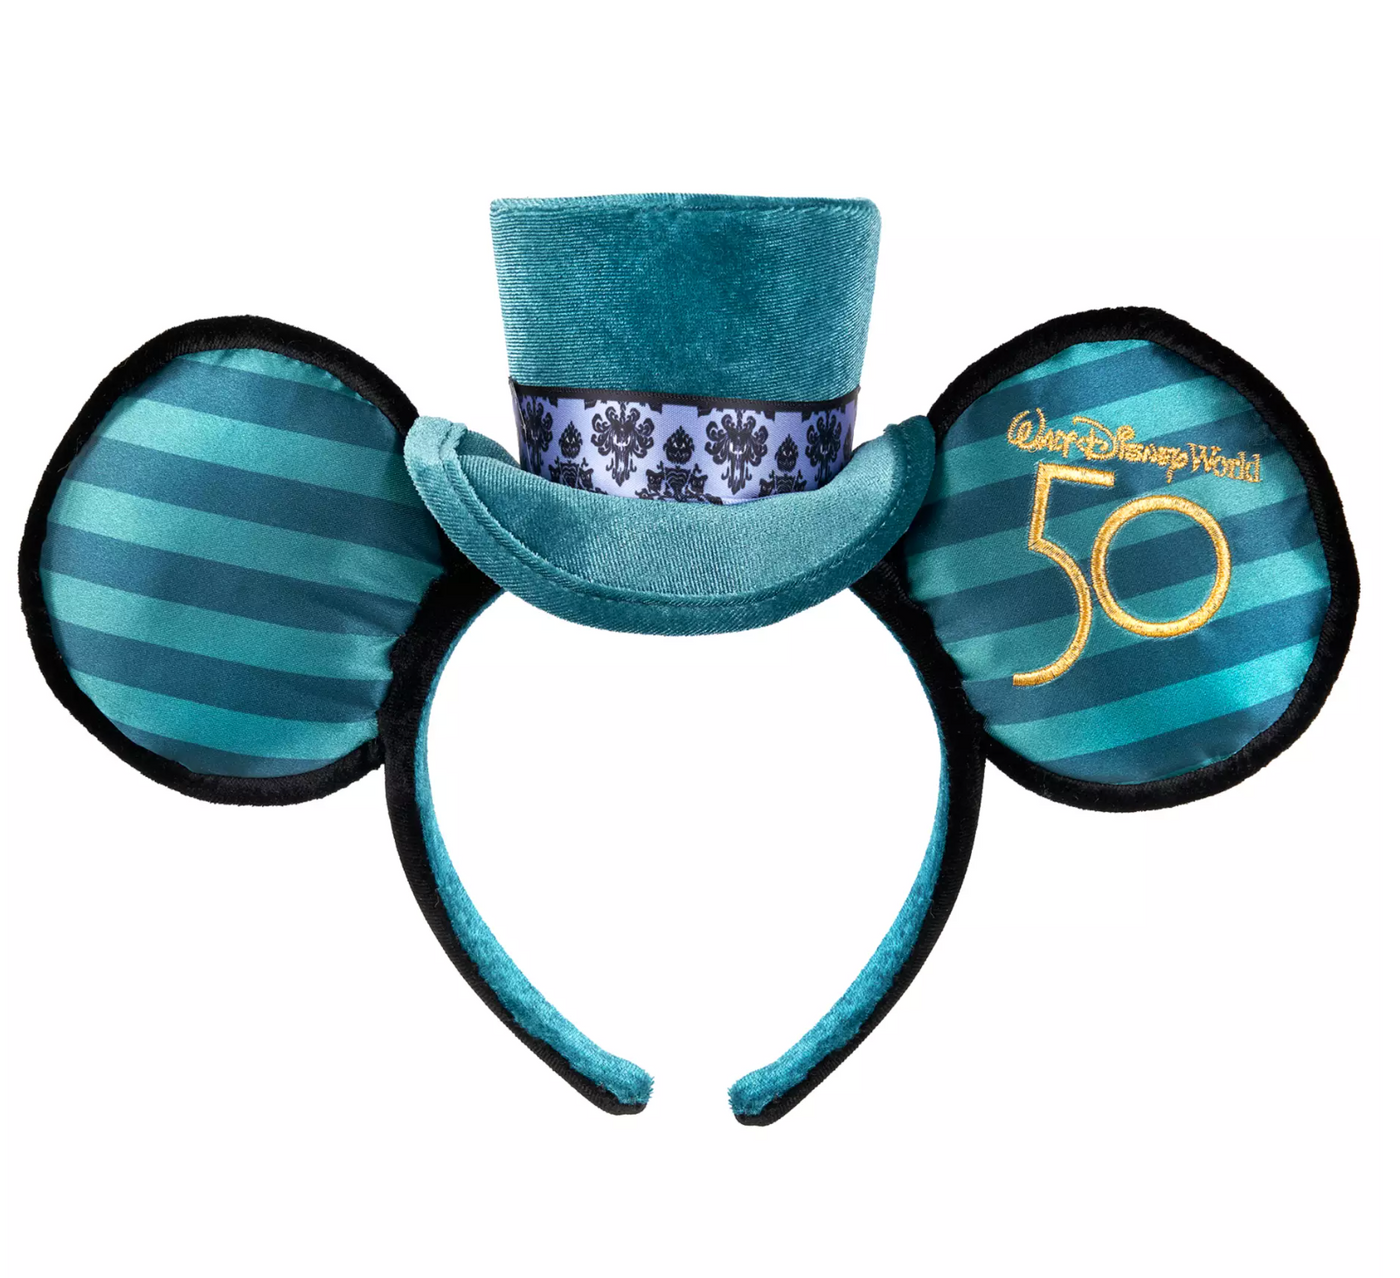 Disney 50th Mickey Attraction The Haunted Mansion Ear Headband for Adults New